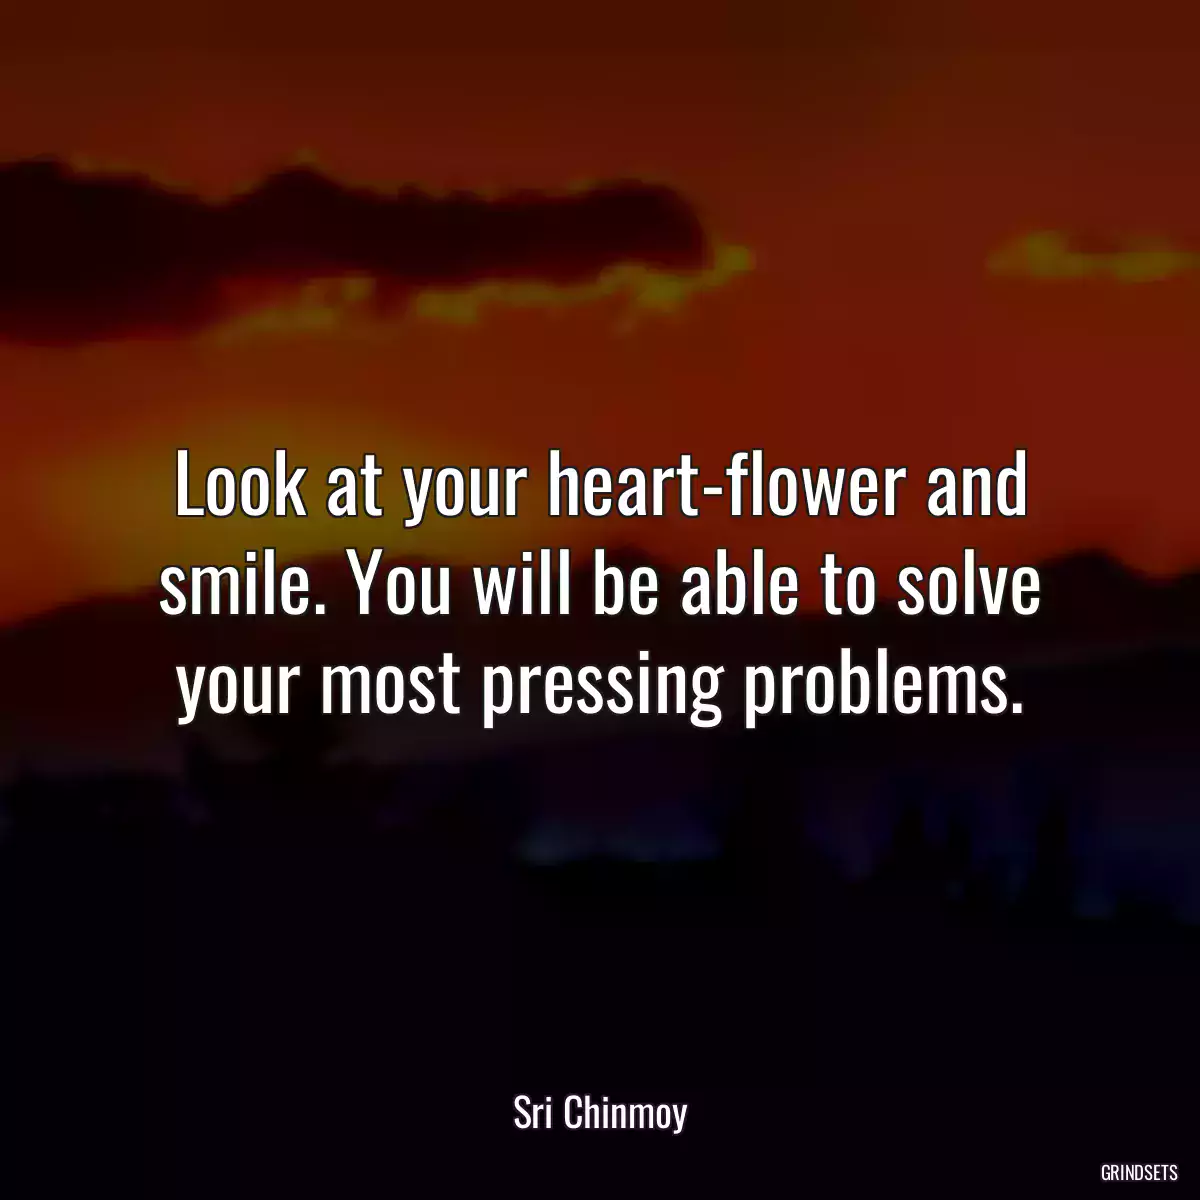 Look at your heart-flower and smile. You will be able to solve your most pressing problems.